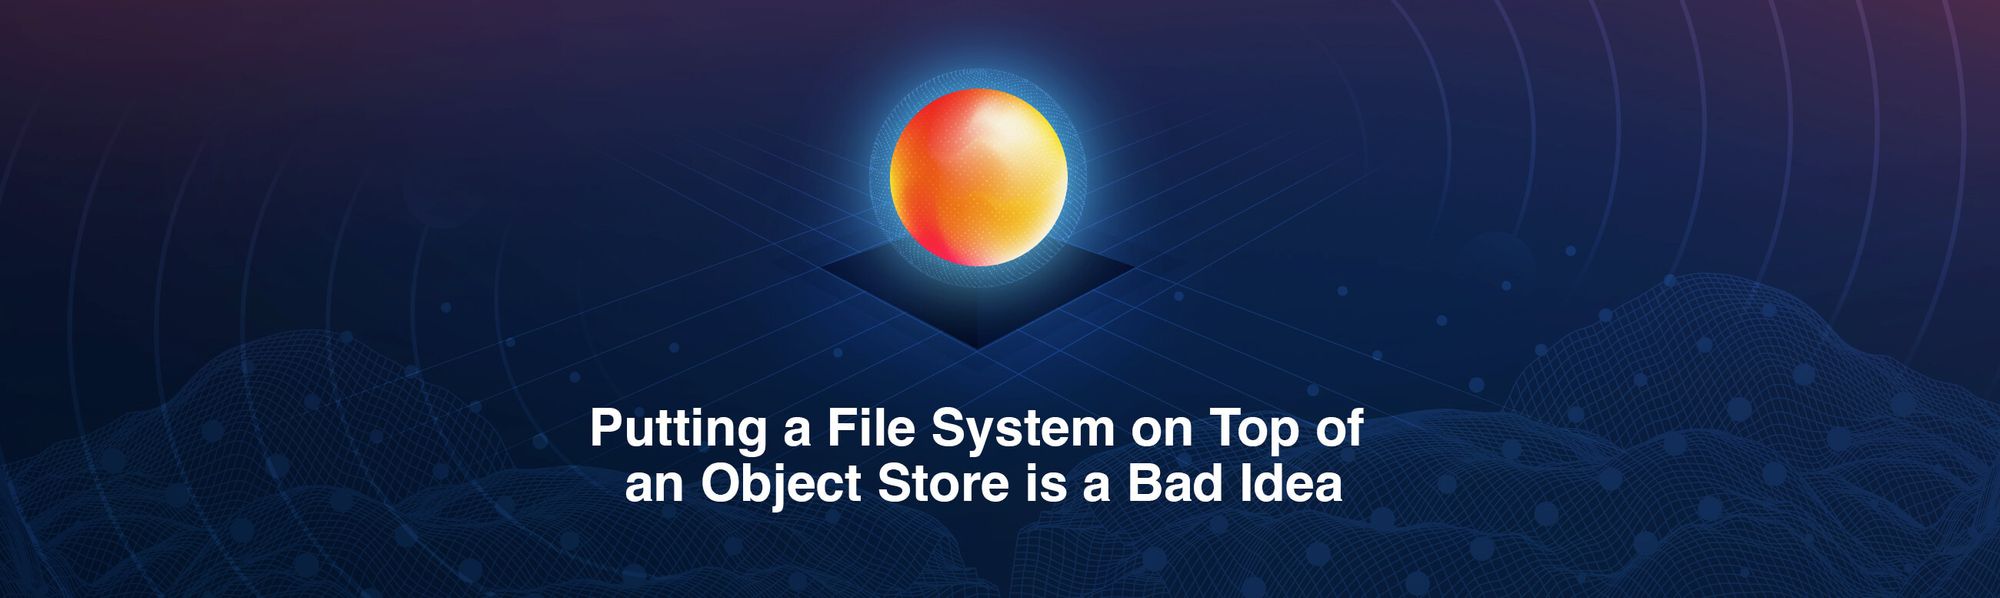 Putting a Filesystem on Top of an Object Store is a Bad Idea. Here is why.